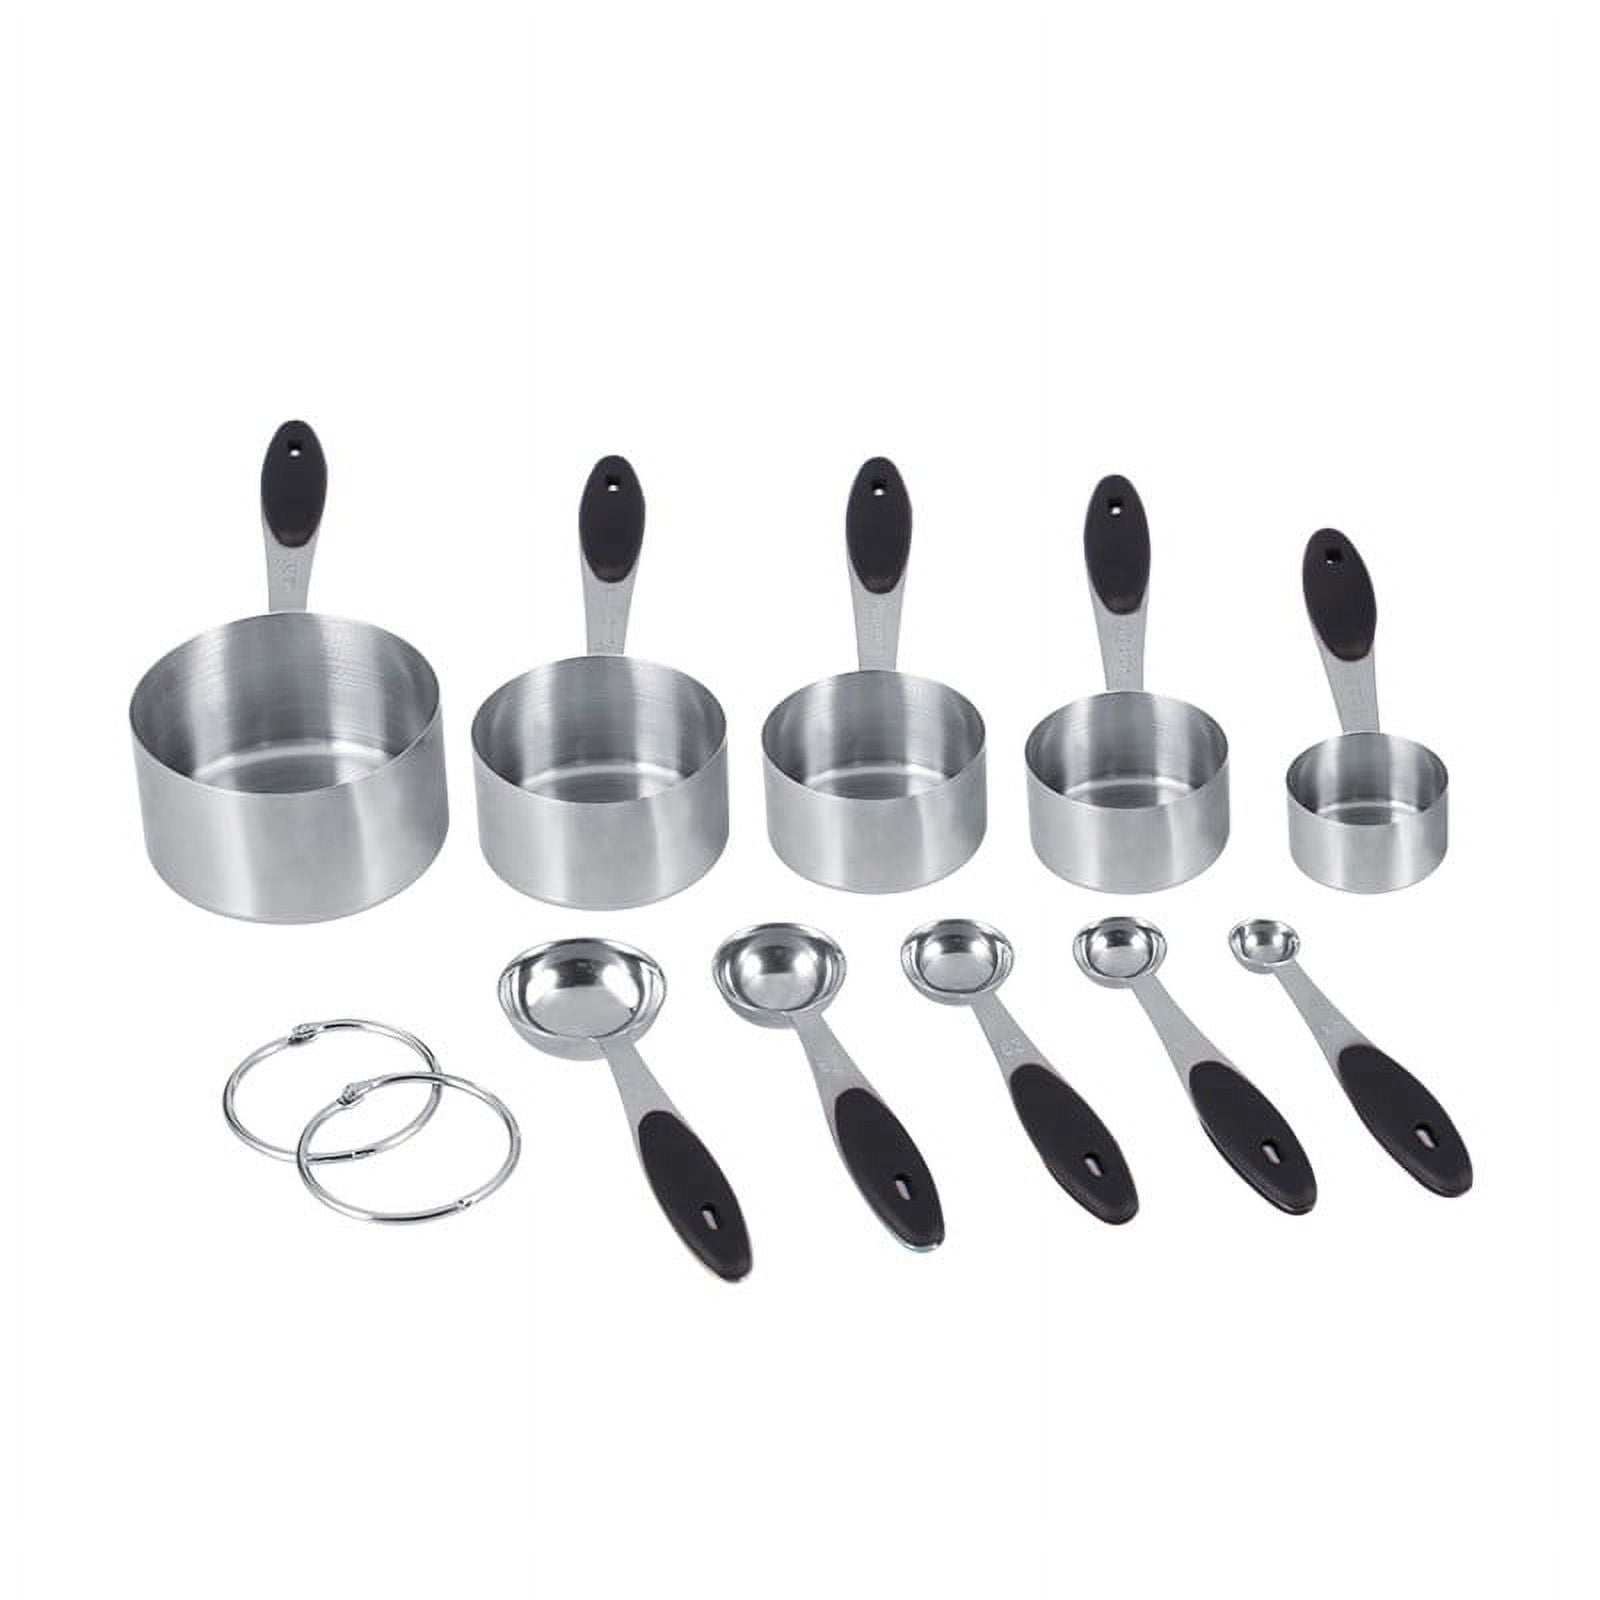  Measuring Cups and Measuring Spoons Set, Wildone Stainless Steel  8 Measuring Cups, 10 Measuring Spoons, 1 Leveler 1 Whisk & 5 Mini Spoons,  for Dry and Liquid Ingredient - 25 Piece Black: Home & Kitchen